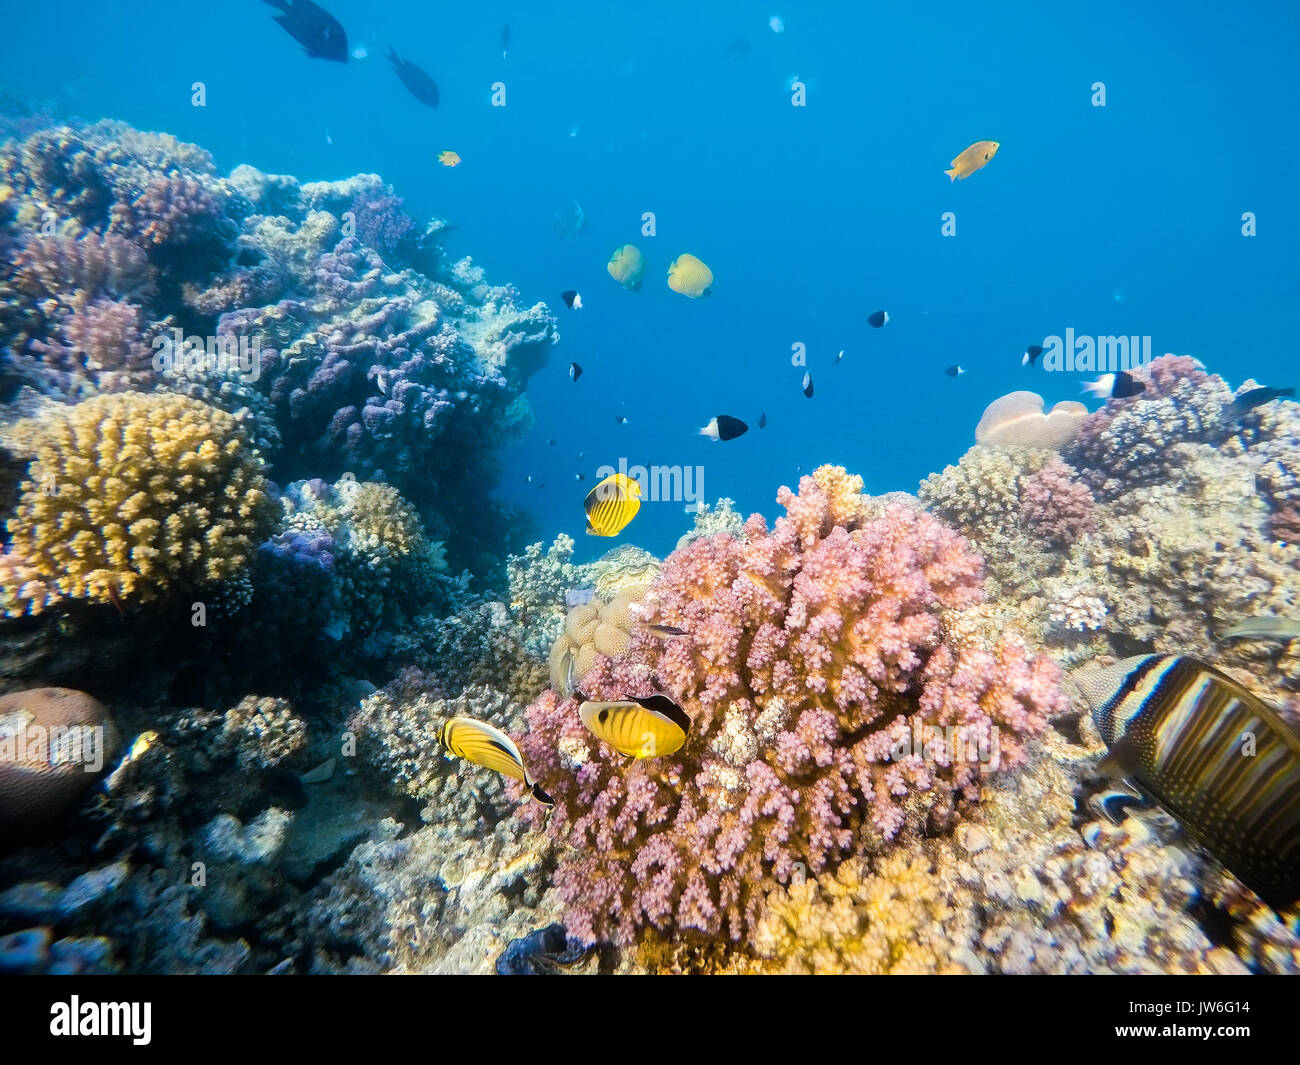 school of fish with Blacktail butterflyfish and sailfin tang on coral garden in red sea, Marsa Alam, Egypt Stock Photo